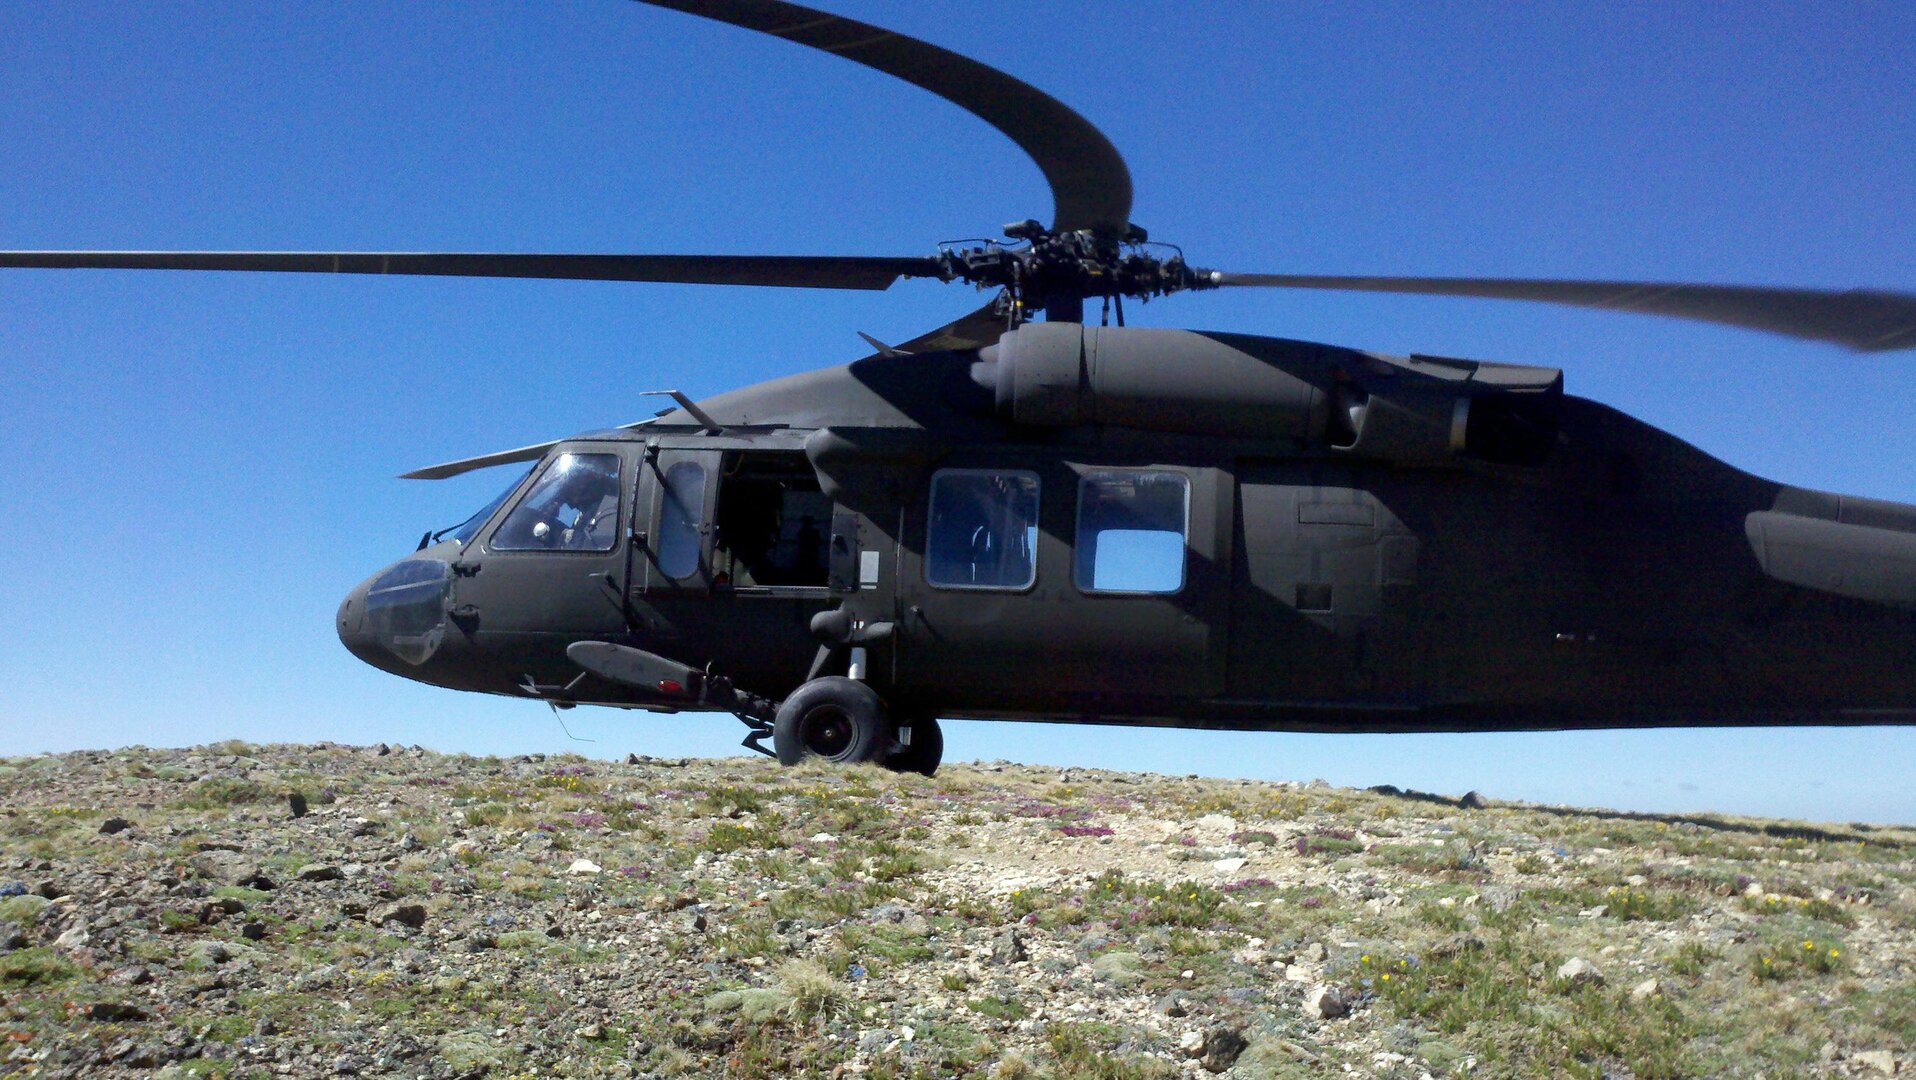 A Colorado Army National Guard UH-60 Black Hawk helicopter from the High-altitude Army National Guard Aviation Training Site (HAATS) in Gypsum, Colo., lands on the summit of Missouri Mountain to transport rescuers to the scene where a father and daughter hiking team went missing June 28.